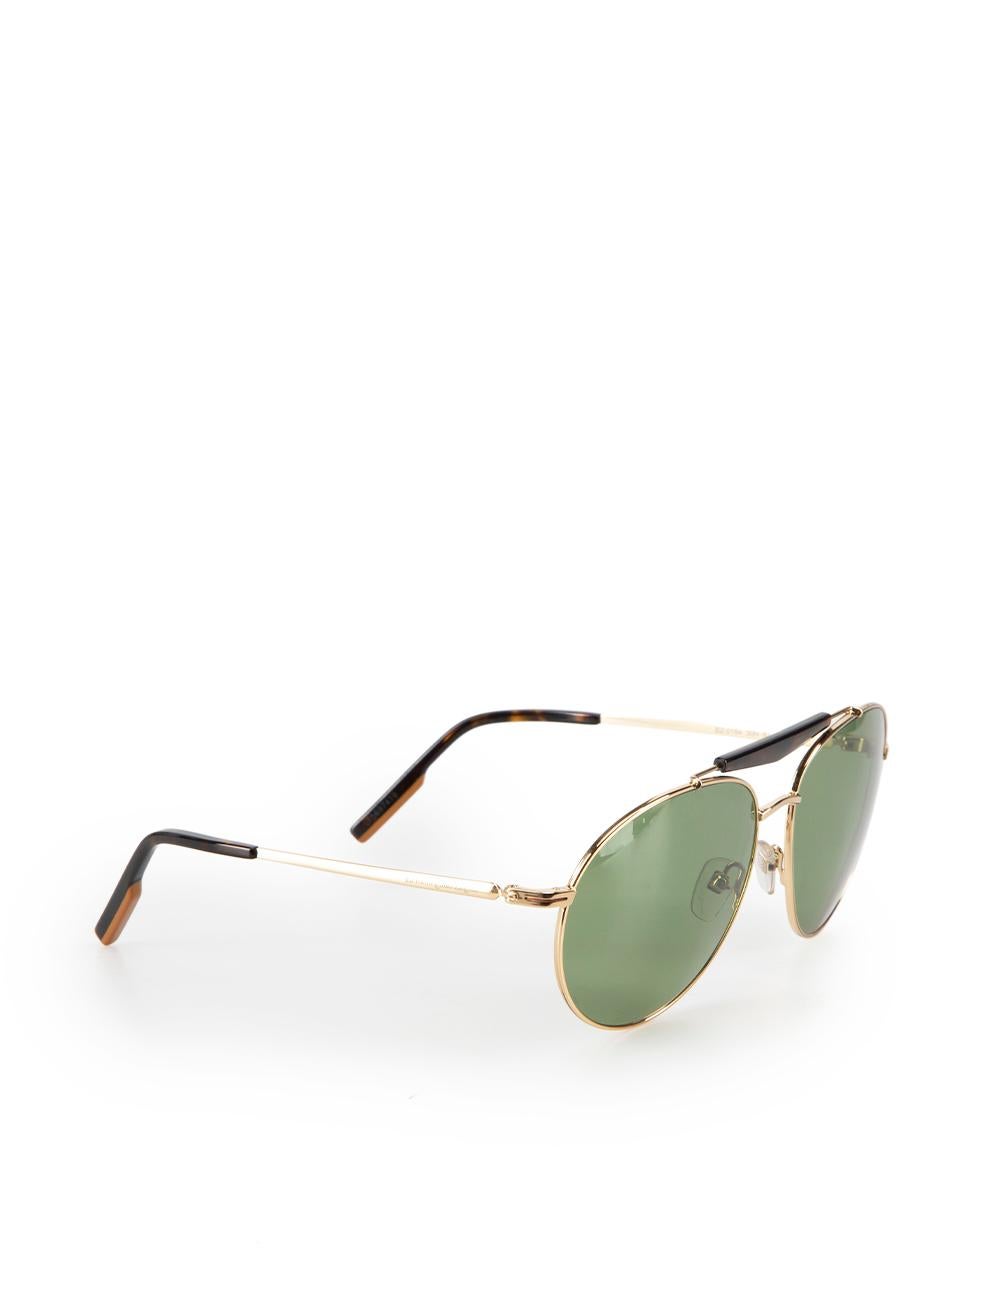 CONDITION is Very good. Hardly any visible wear to sunglasses is evident on this used Ermenegildo Zegna designer resale item. This item comes with original case.



Details


Brown

Metal

Aviator sunglasses

Tortoiseshell accent

Tinted green